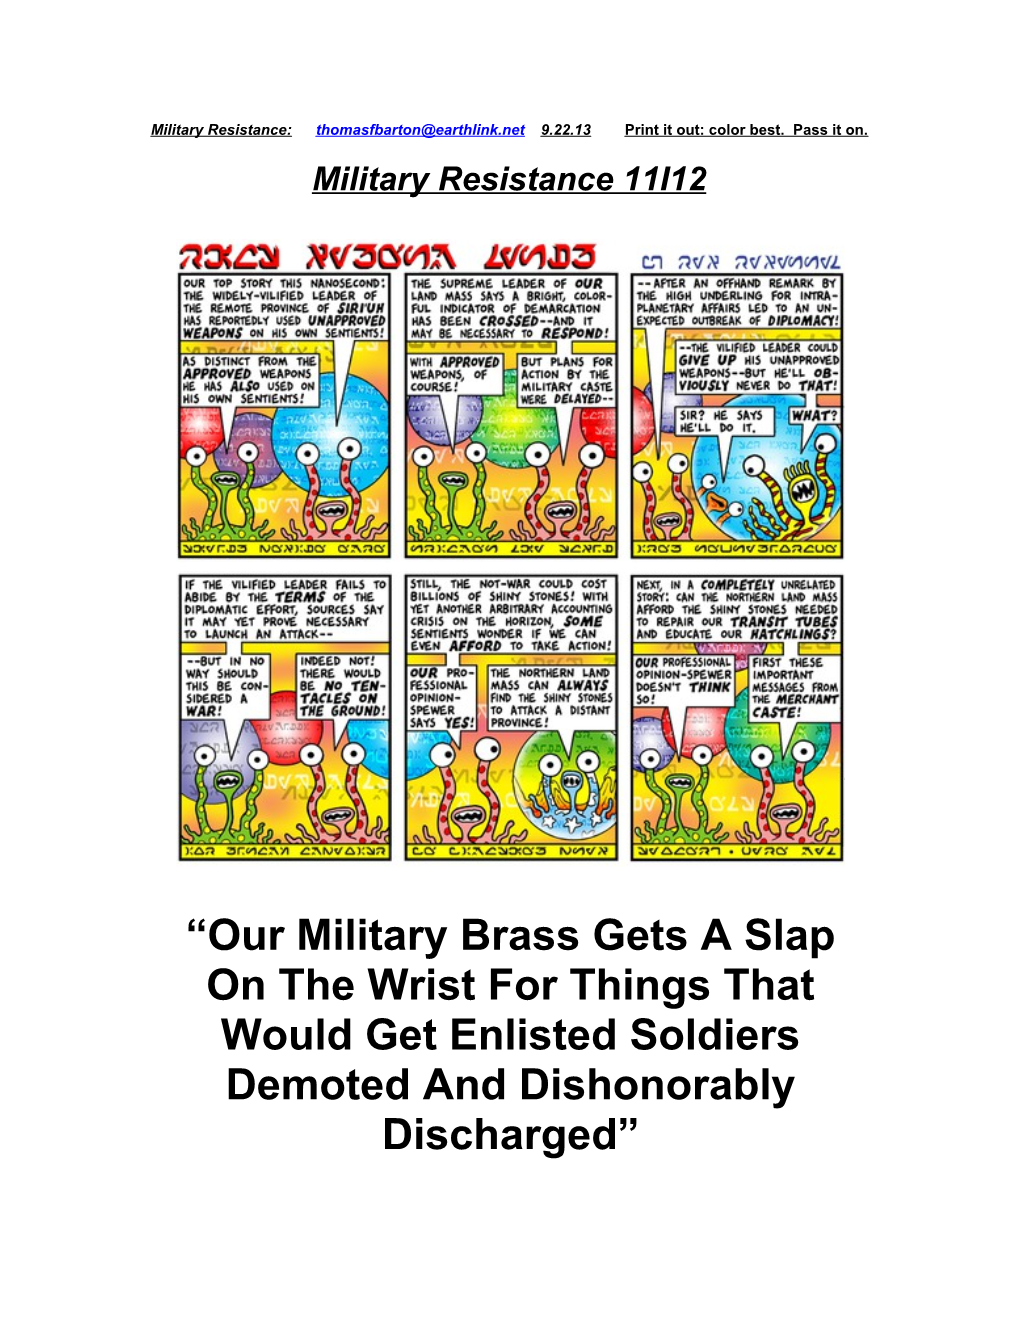 Military Resistance 11I12